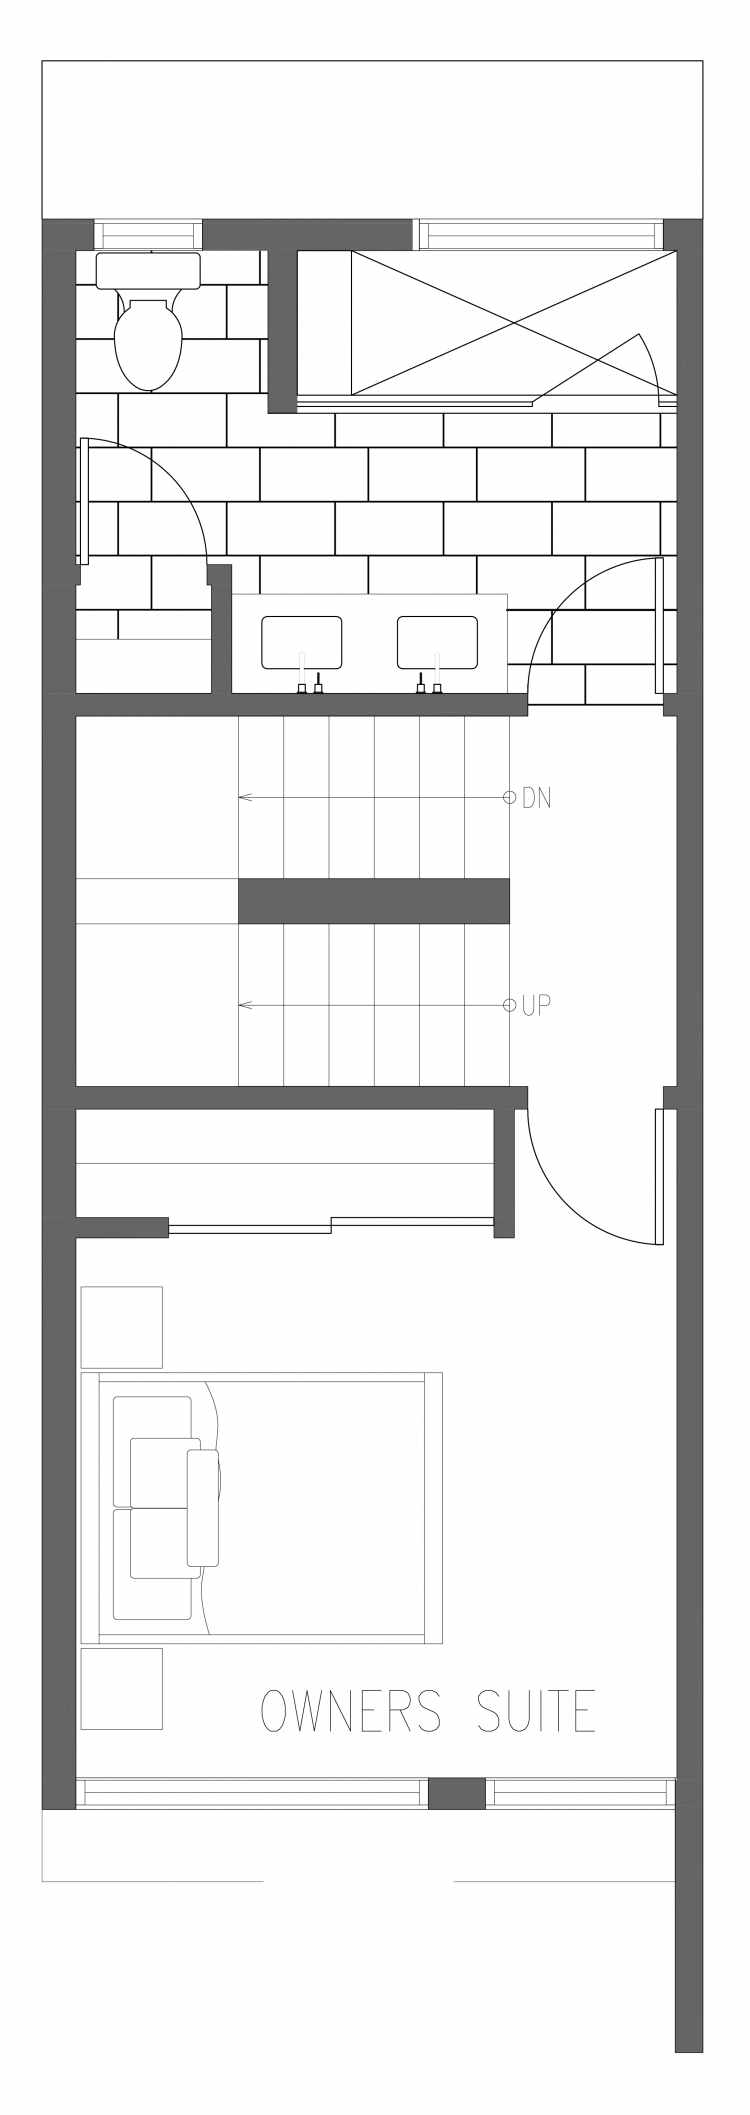 Third Floor Plan of 2365 Beacon Ave S, One of the Brea Townhomes in North Beacon Hill